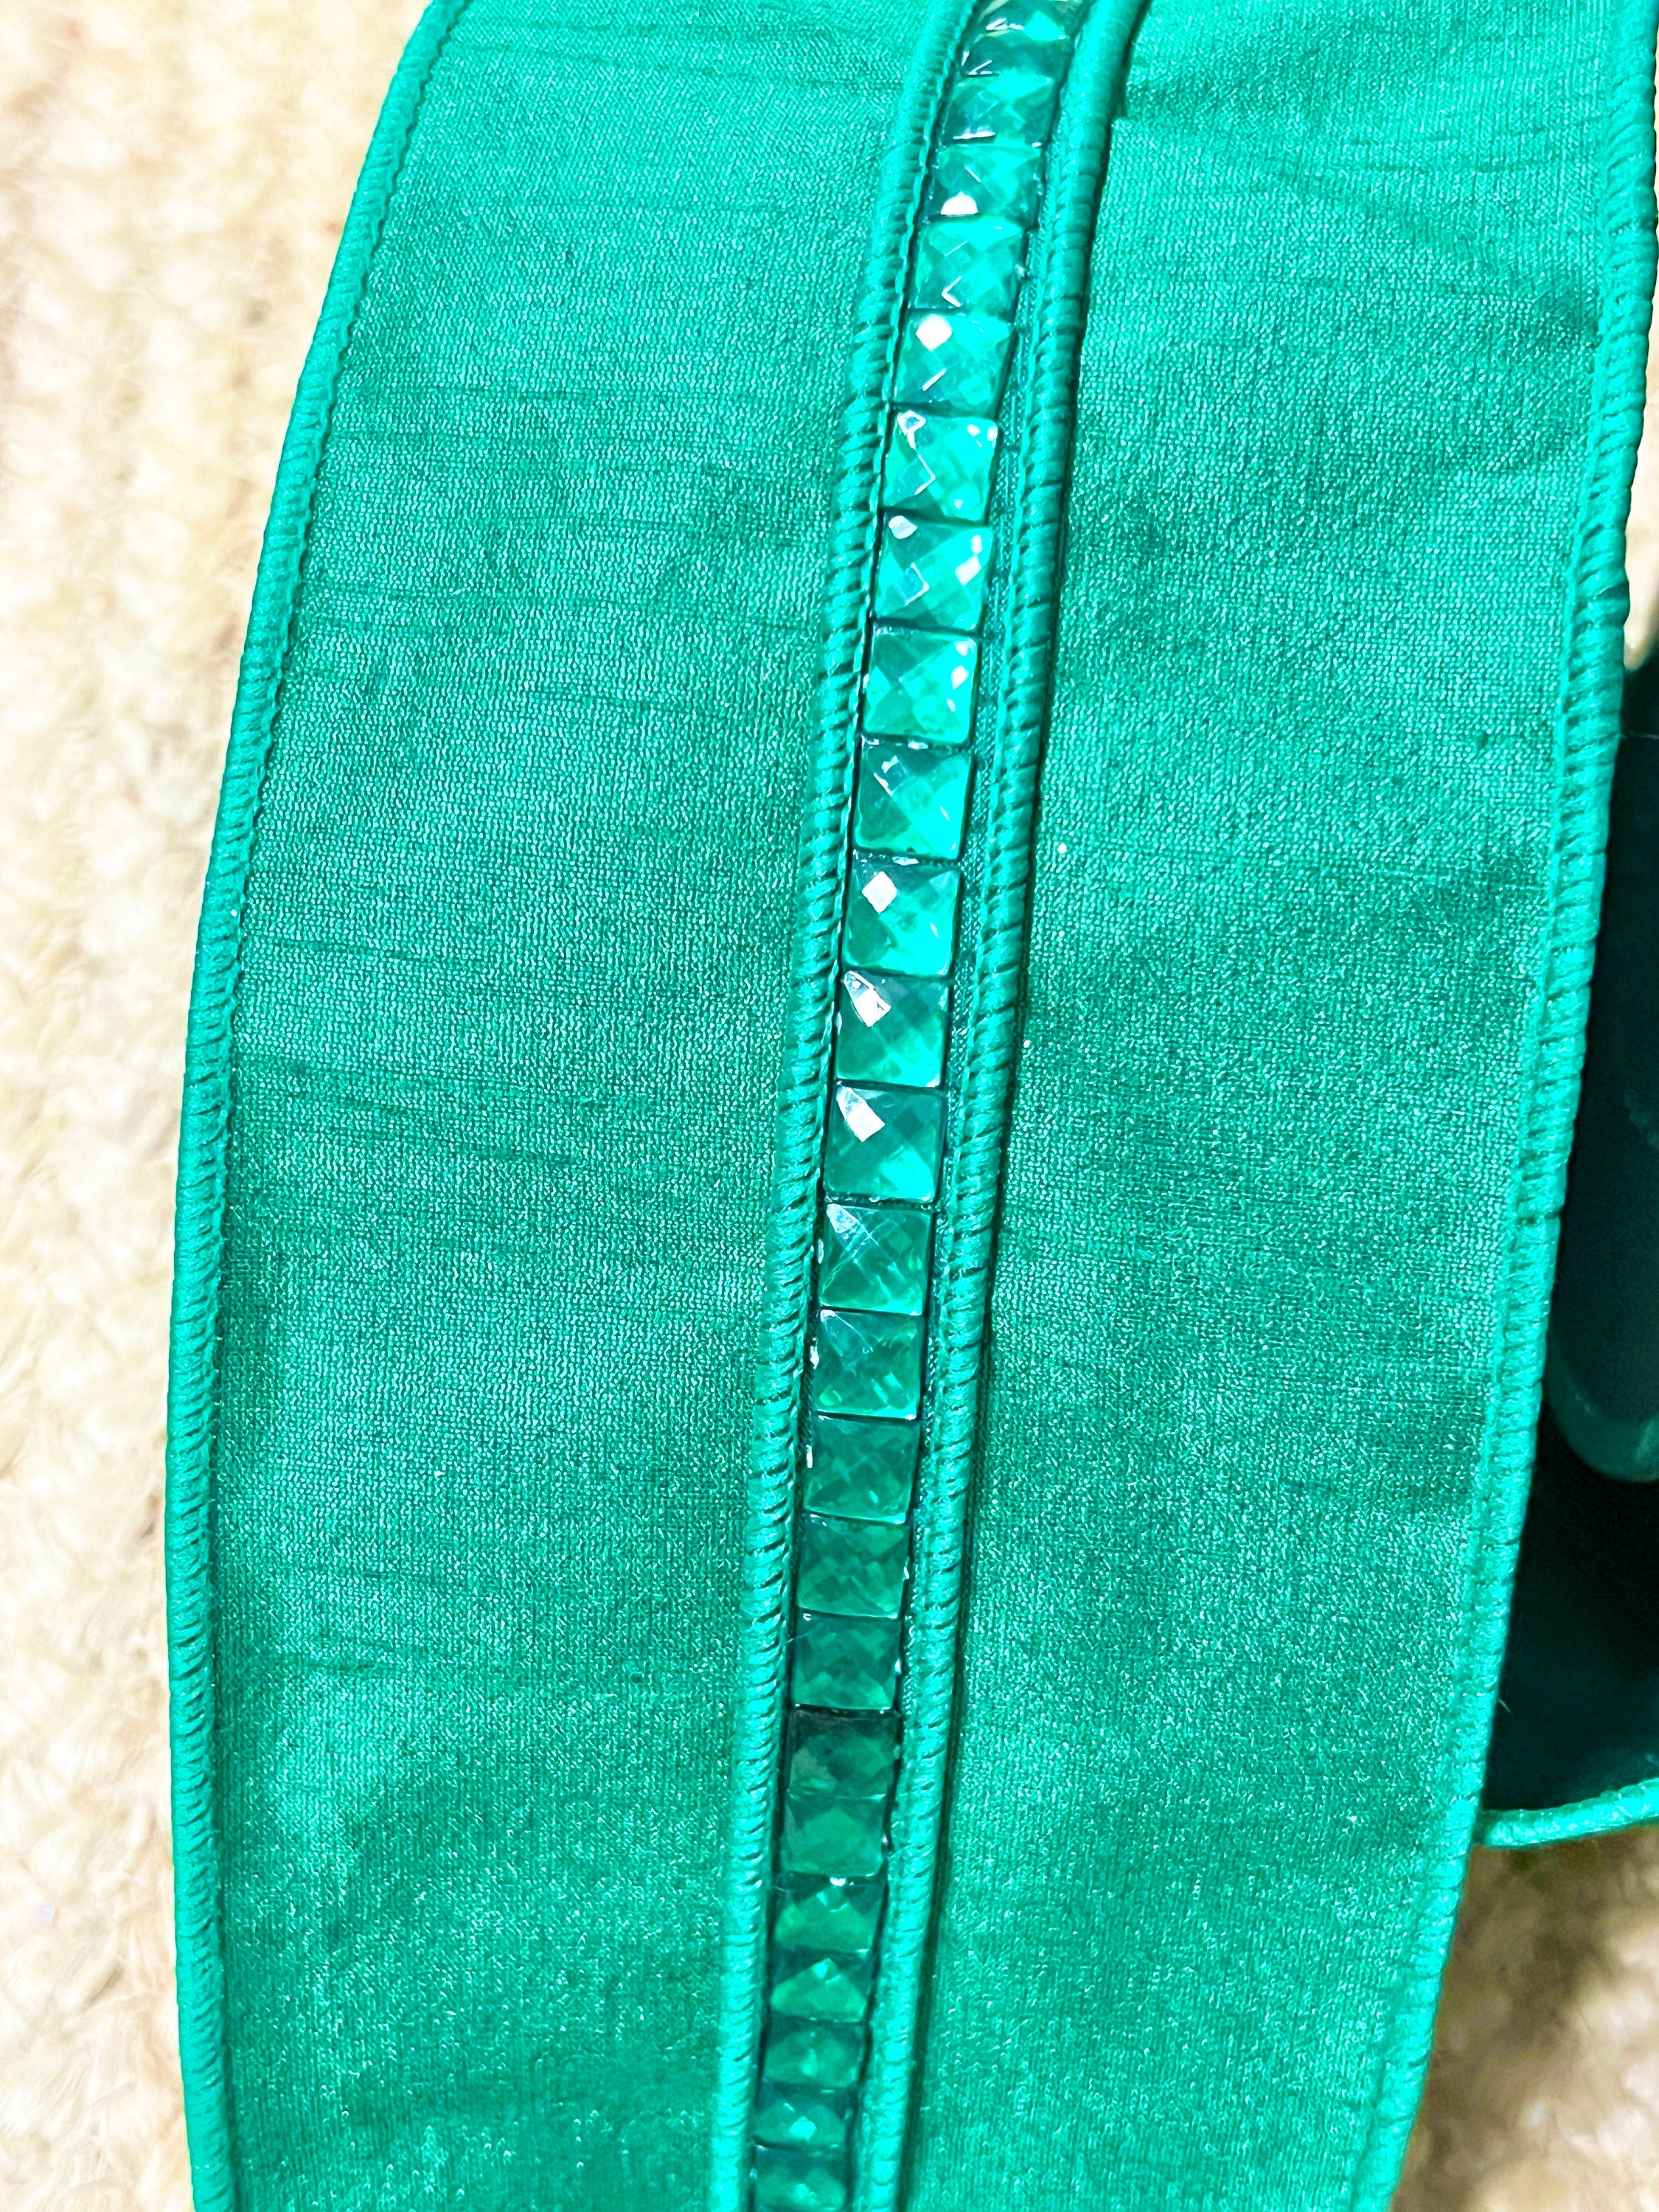 4 inch Farrisilk Emerald Green Dupion With Emerald Green Jewel Embroidered Center ~ 10 yards ~ Wired